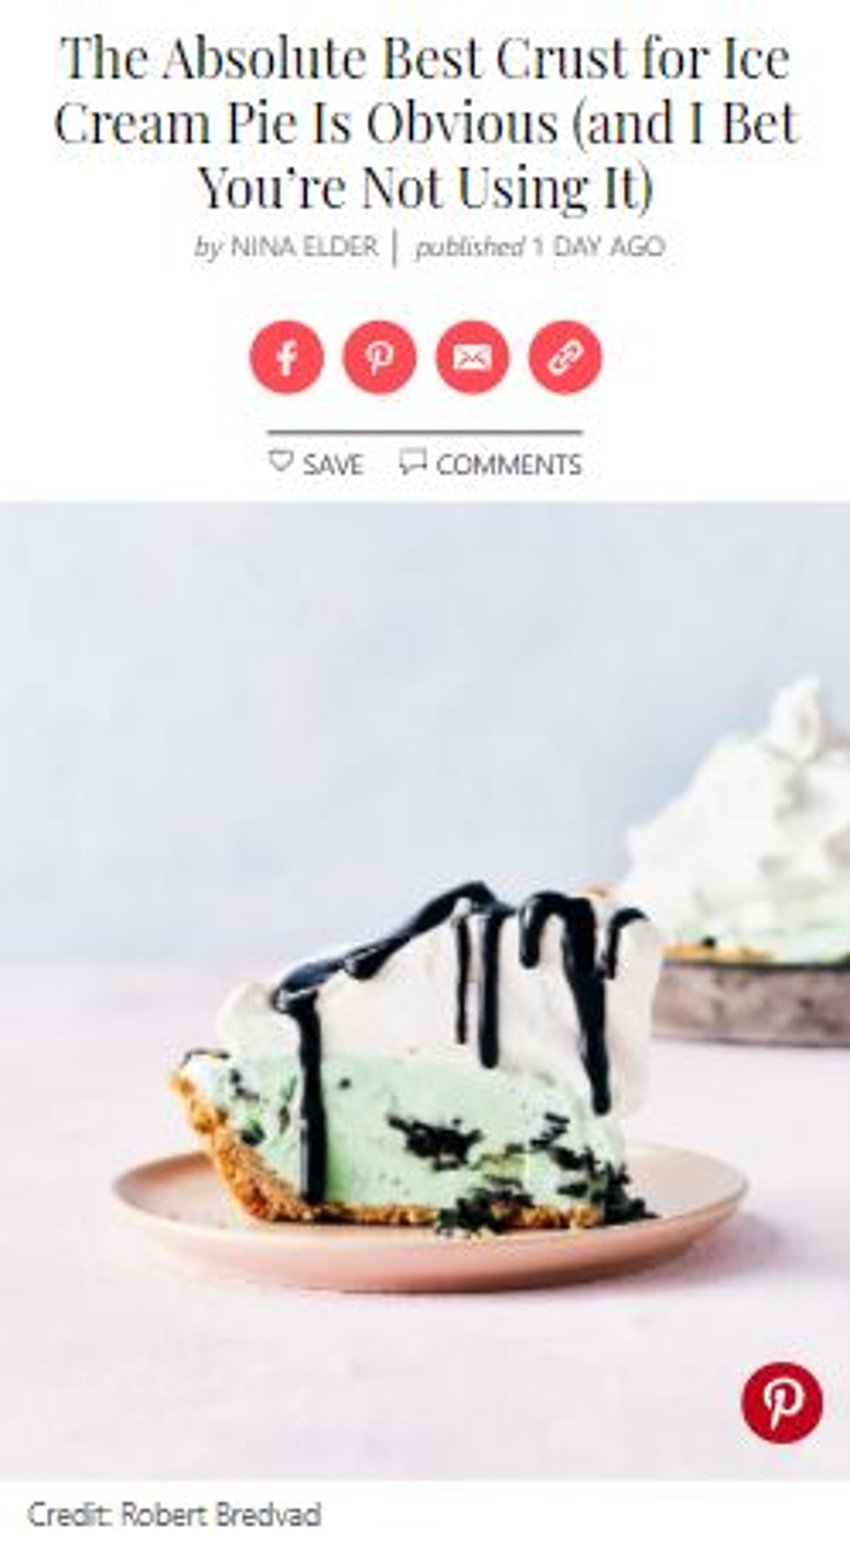 check out the full post [here](https://www.thekitchn.com/ice-cream-cone-pie-crust-23186002)